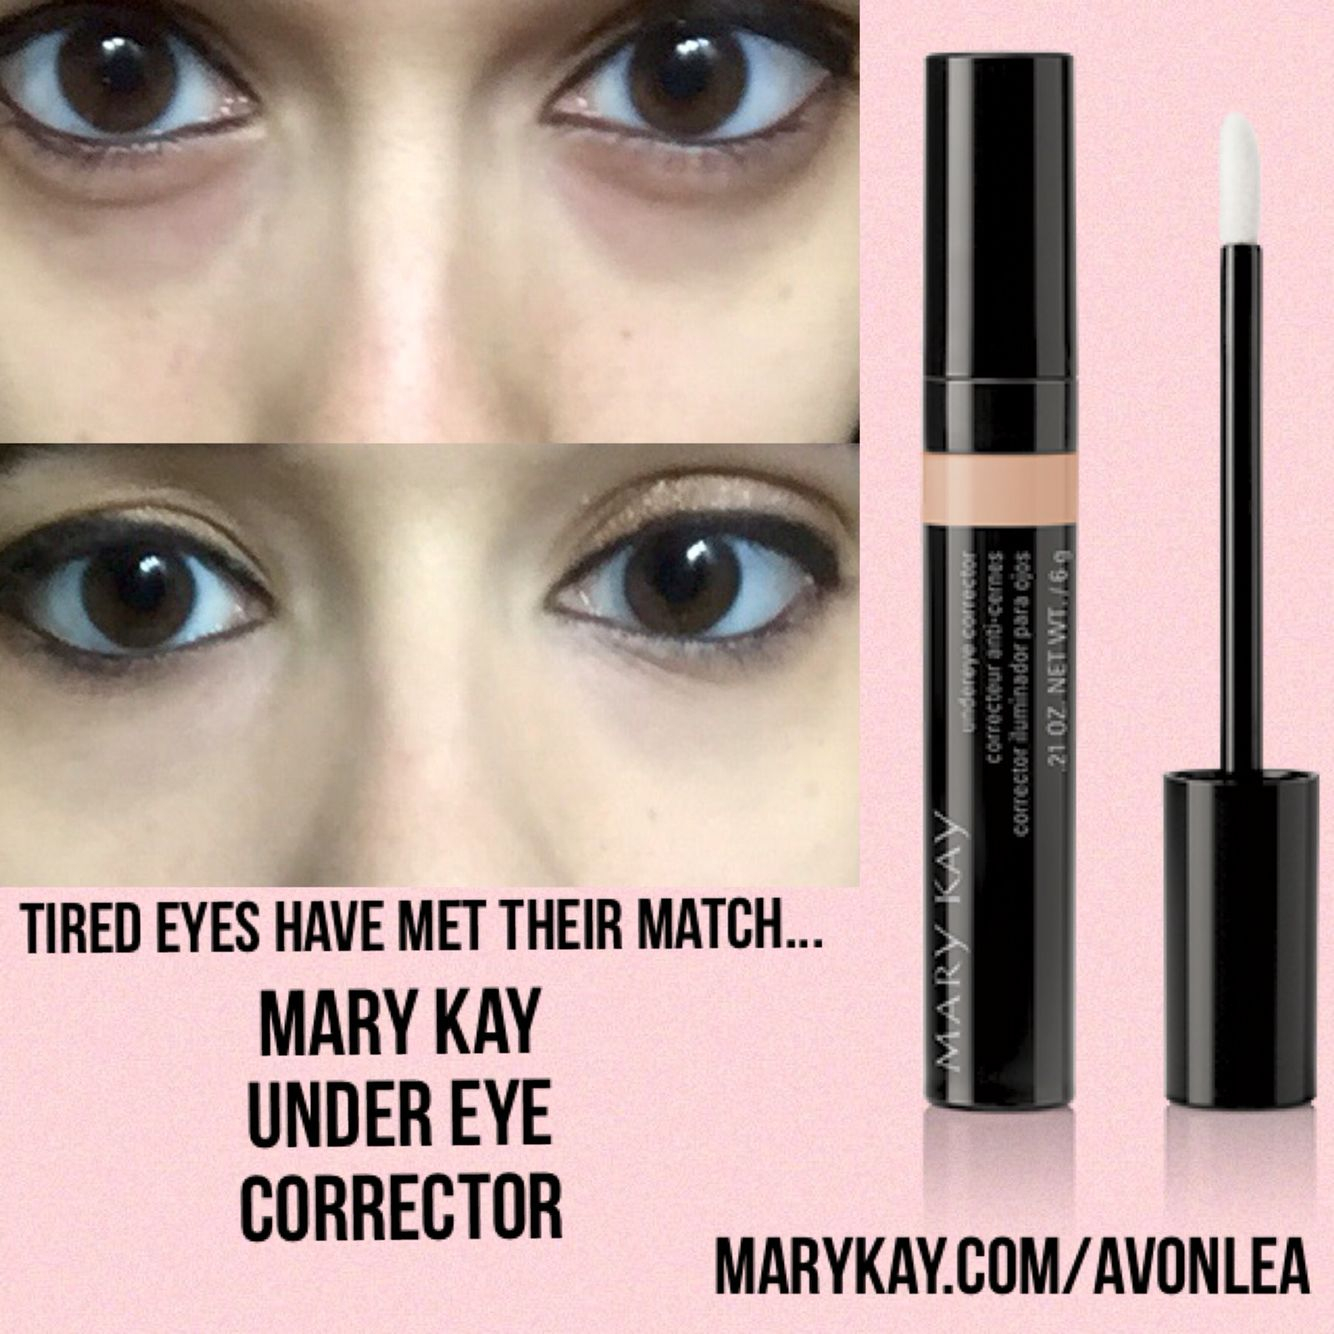 Makeup For Under Eye Bags The New Mary Kay Under Eye Corrector Is A Total Game Changer For